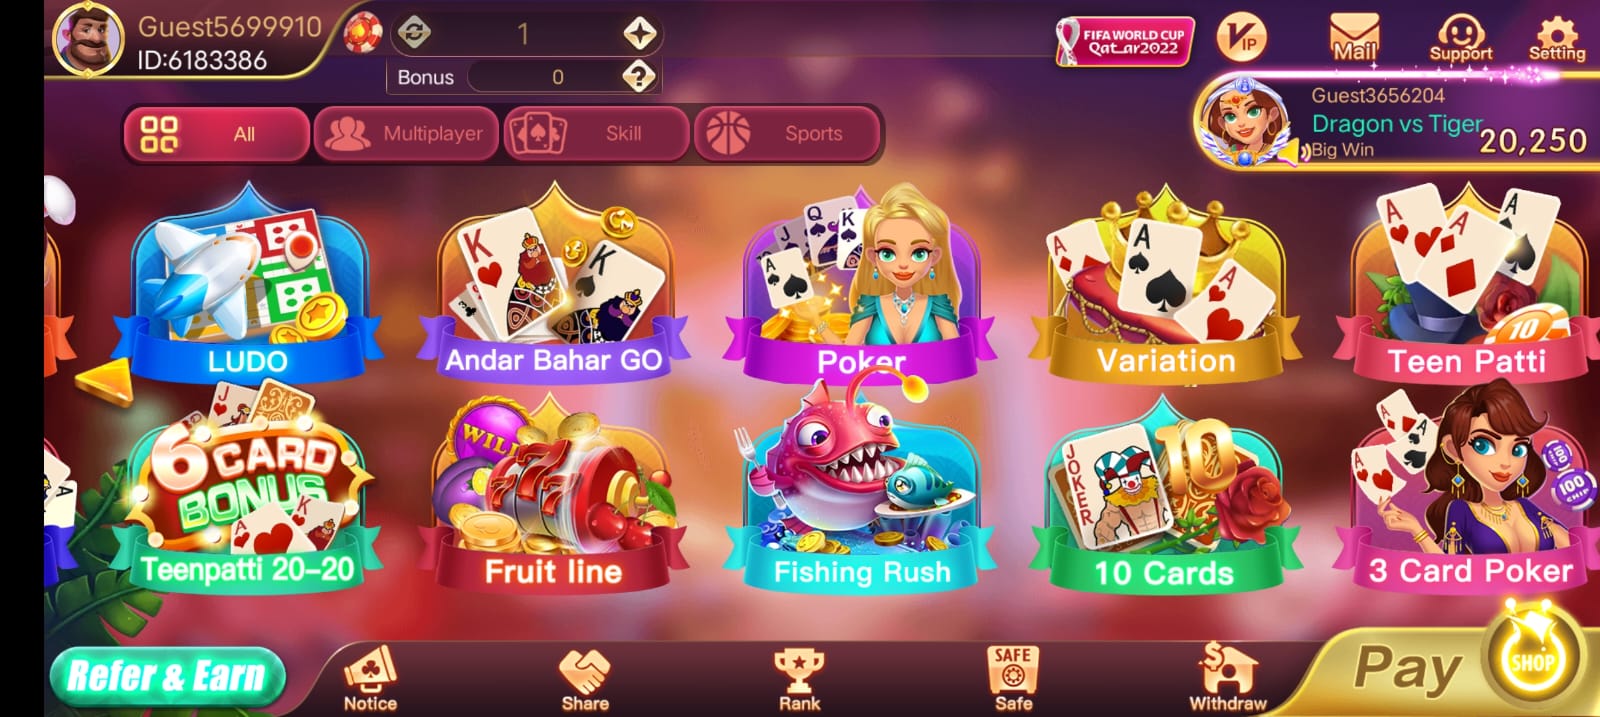 Available Games on Rummy Most Apk